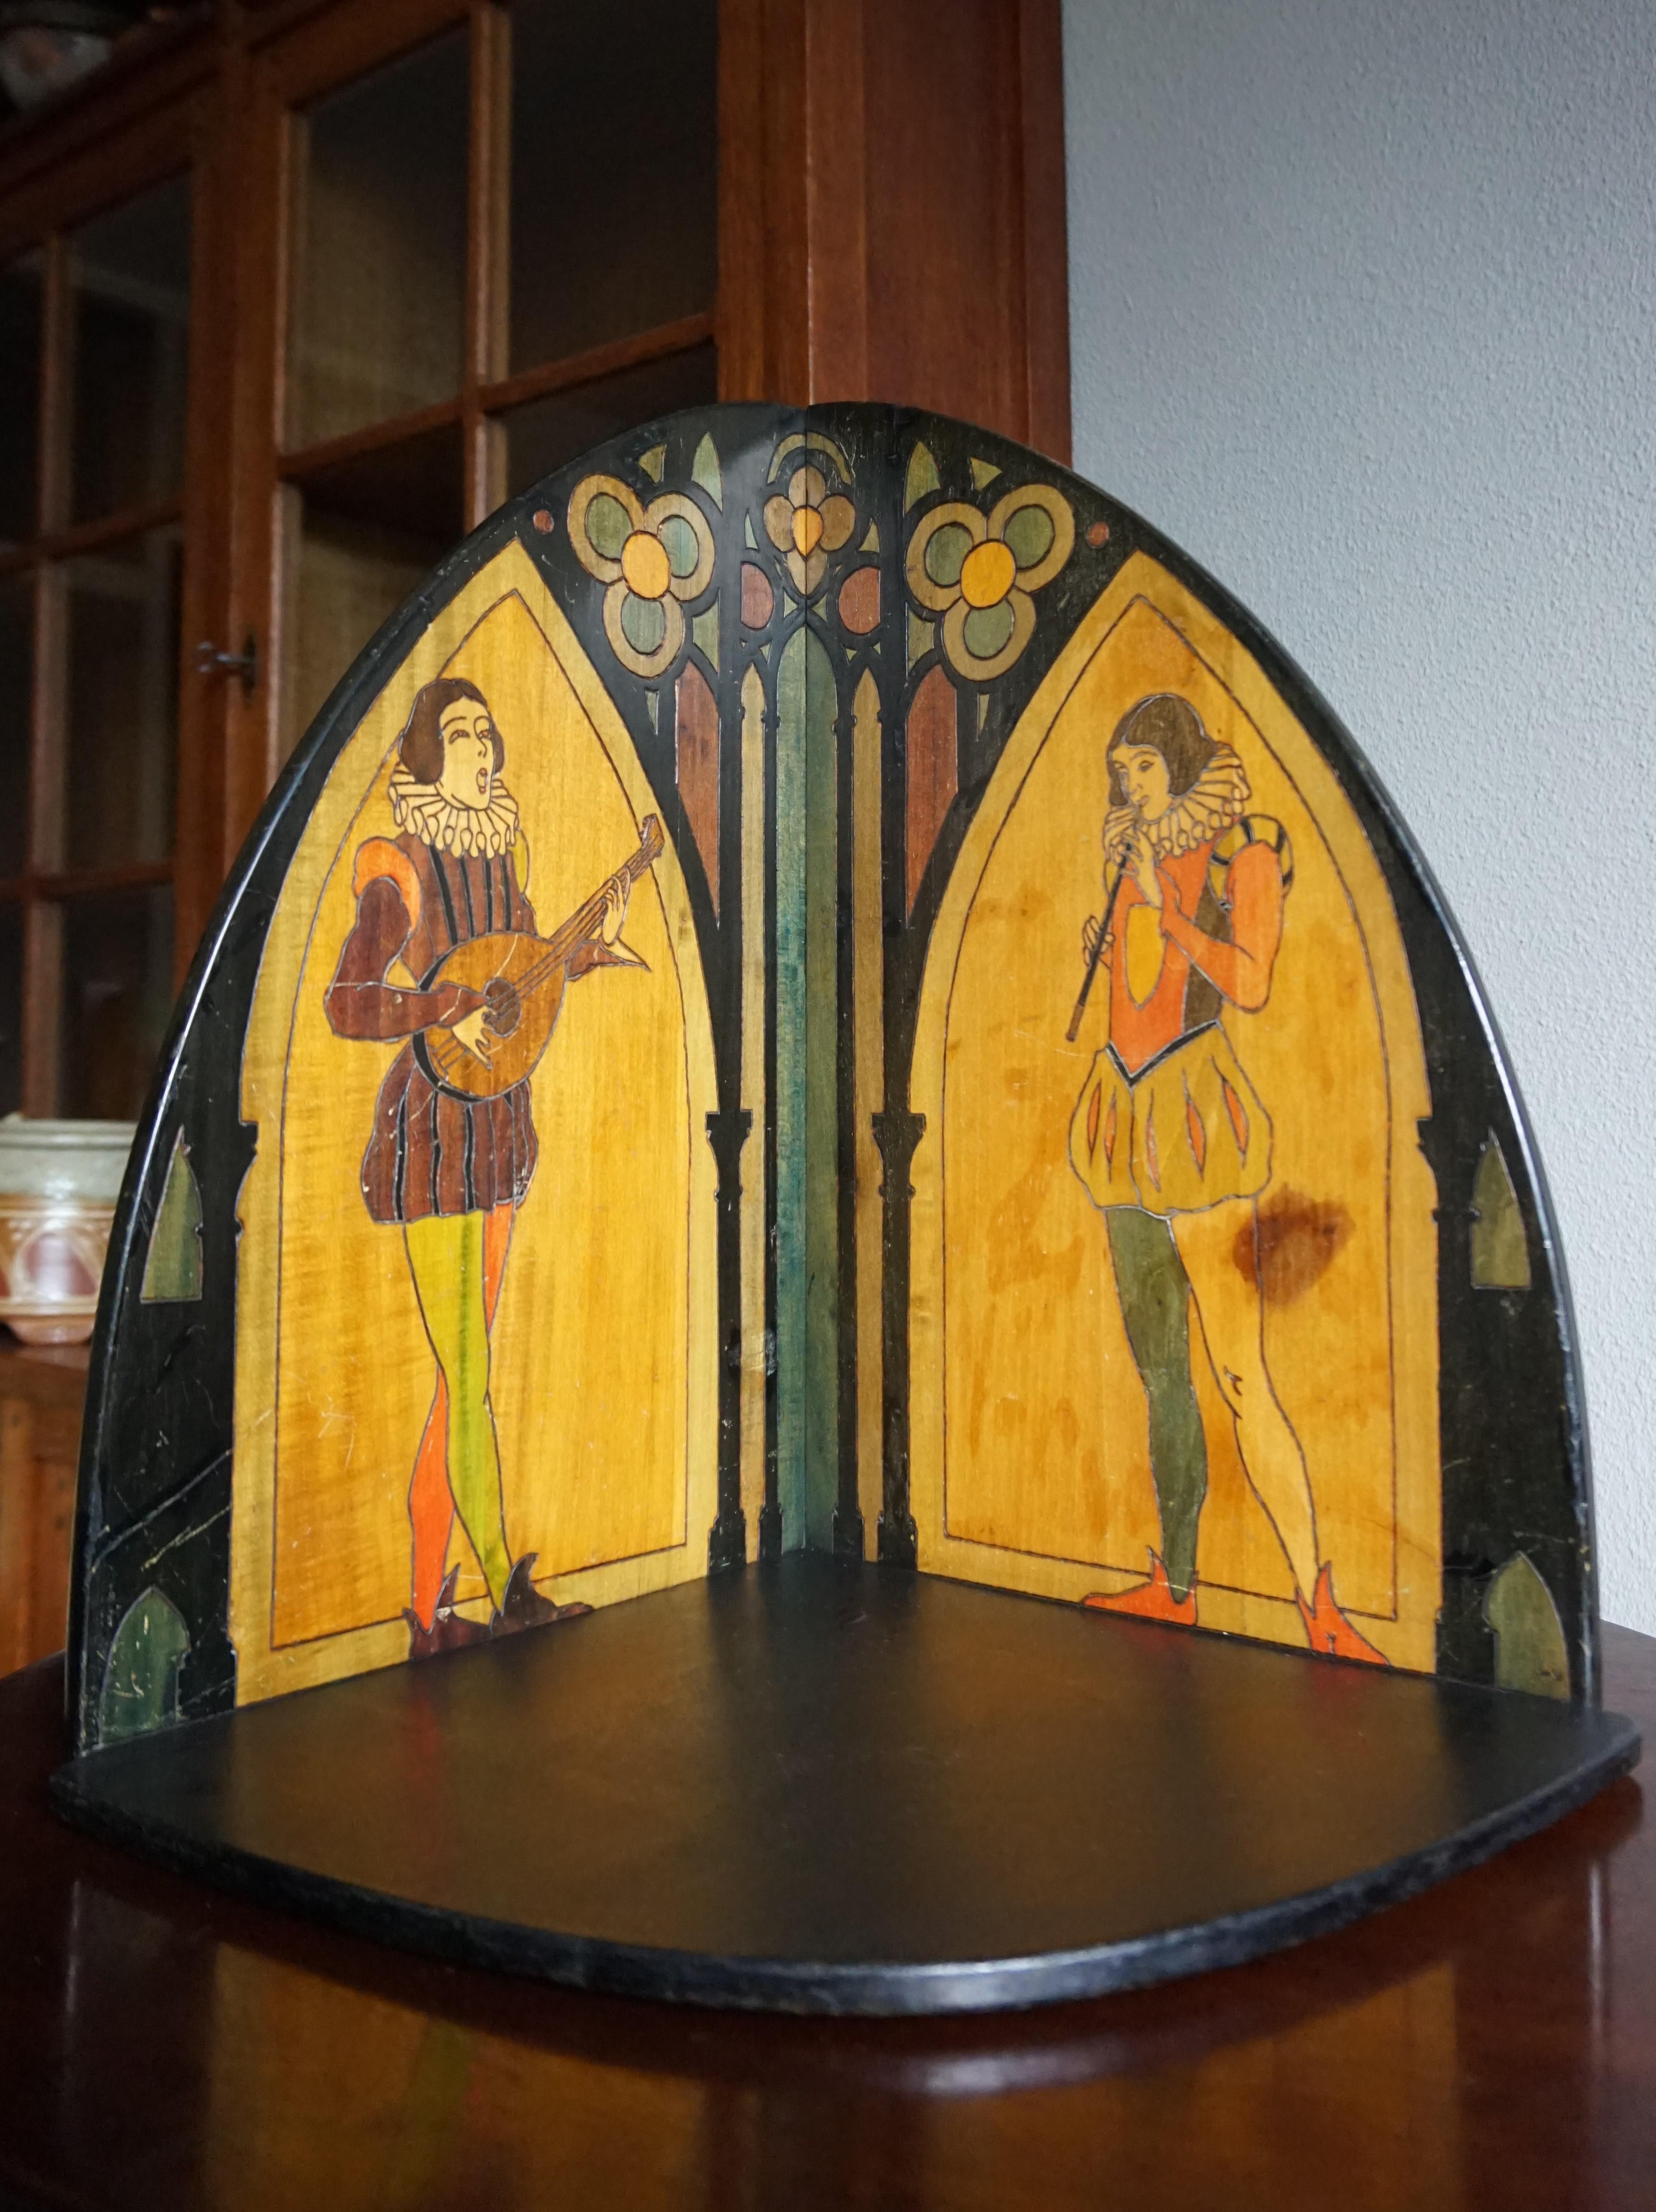 Unique wall bracket with colorful court jesters / musicians.

If you collect one of a kind antiques in the Gothic style then this artistic and all handcrafted corner shelf could be for you. All the outlines of the decorations that you see in this